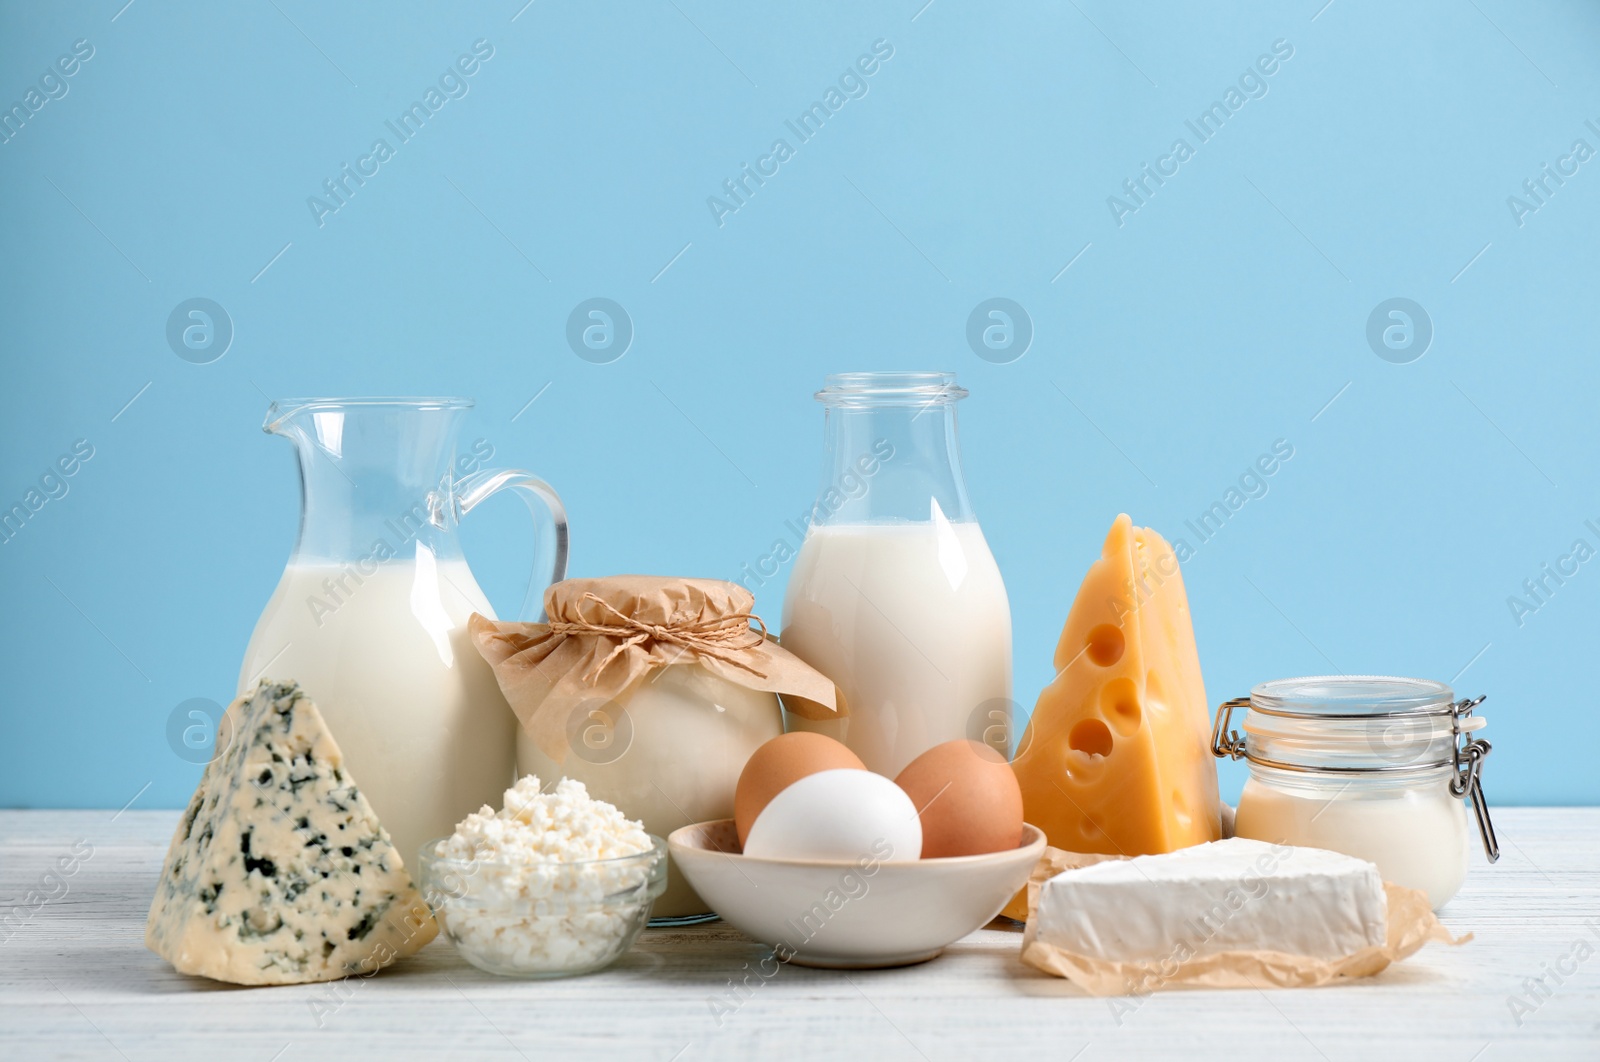 Photo of Different dairy products on white table against blue background